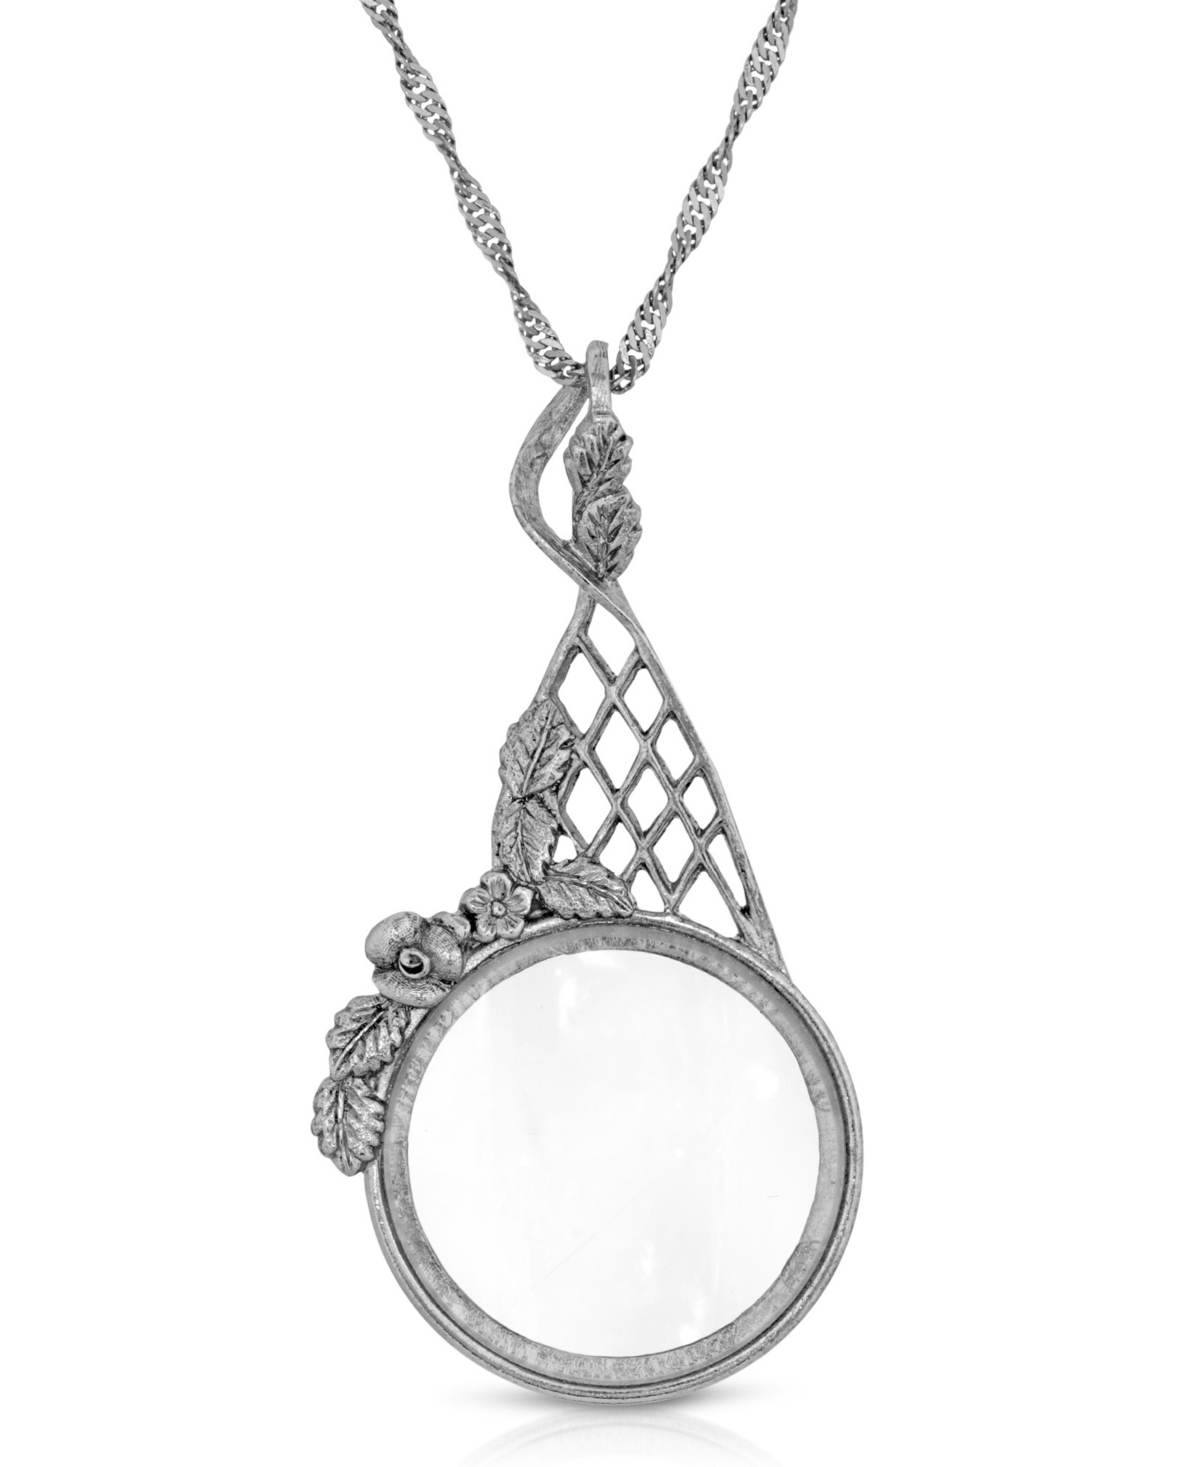 Gold Tone Filigree Magnifying Glass 28" Necklace - Gray